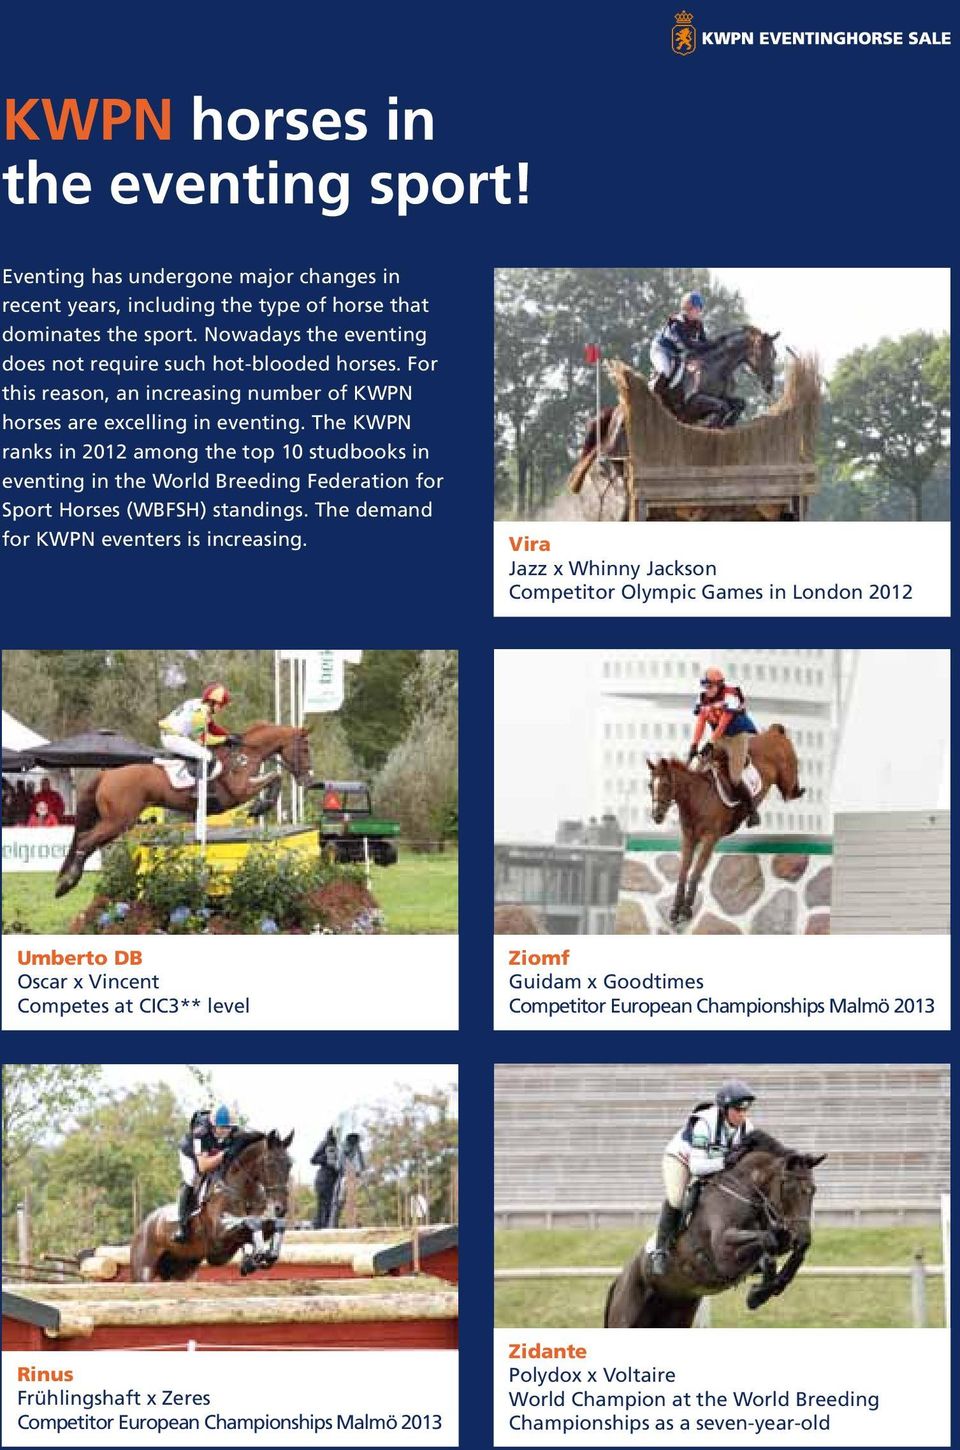 The KWPN ranks in 2012 among the top 10 studbooks in eventing in the World Breeding Federation for Sport Horses (WBFSH) standings. The demand for KWPN eventers is increasing.